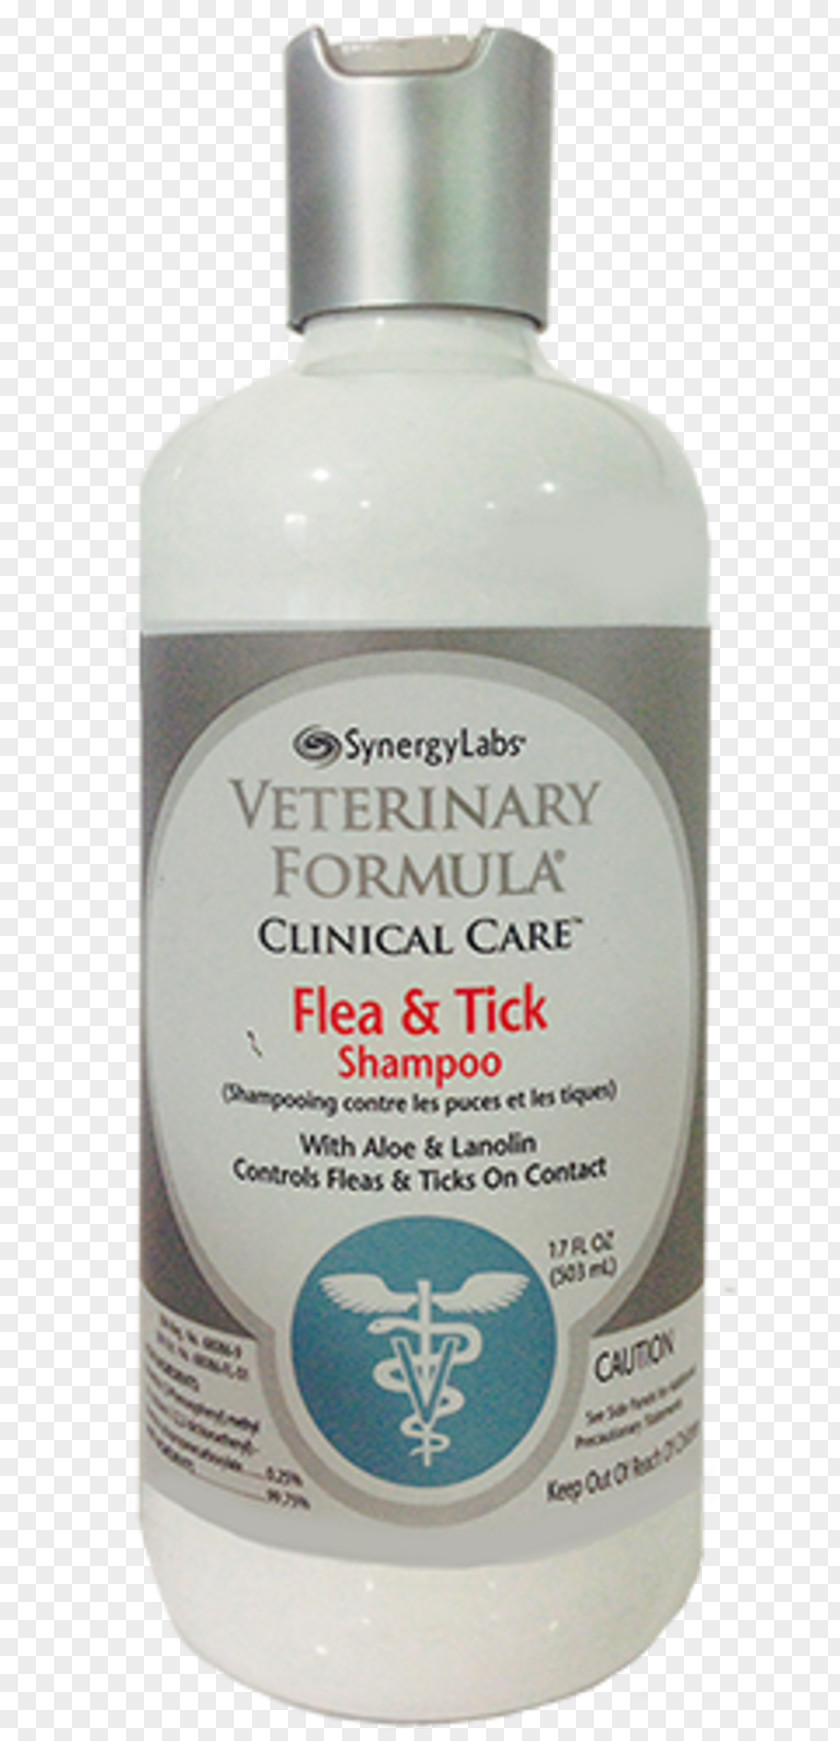 Shampoo Lotion Synergy Labs Veterinary Medicine Antiparasitic PNG